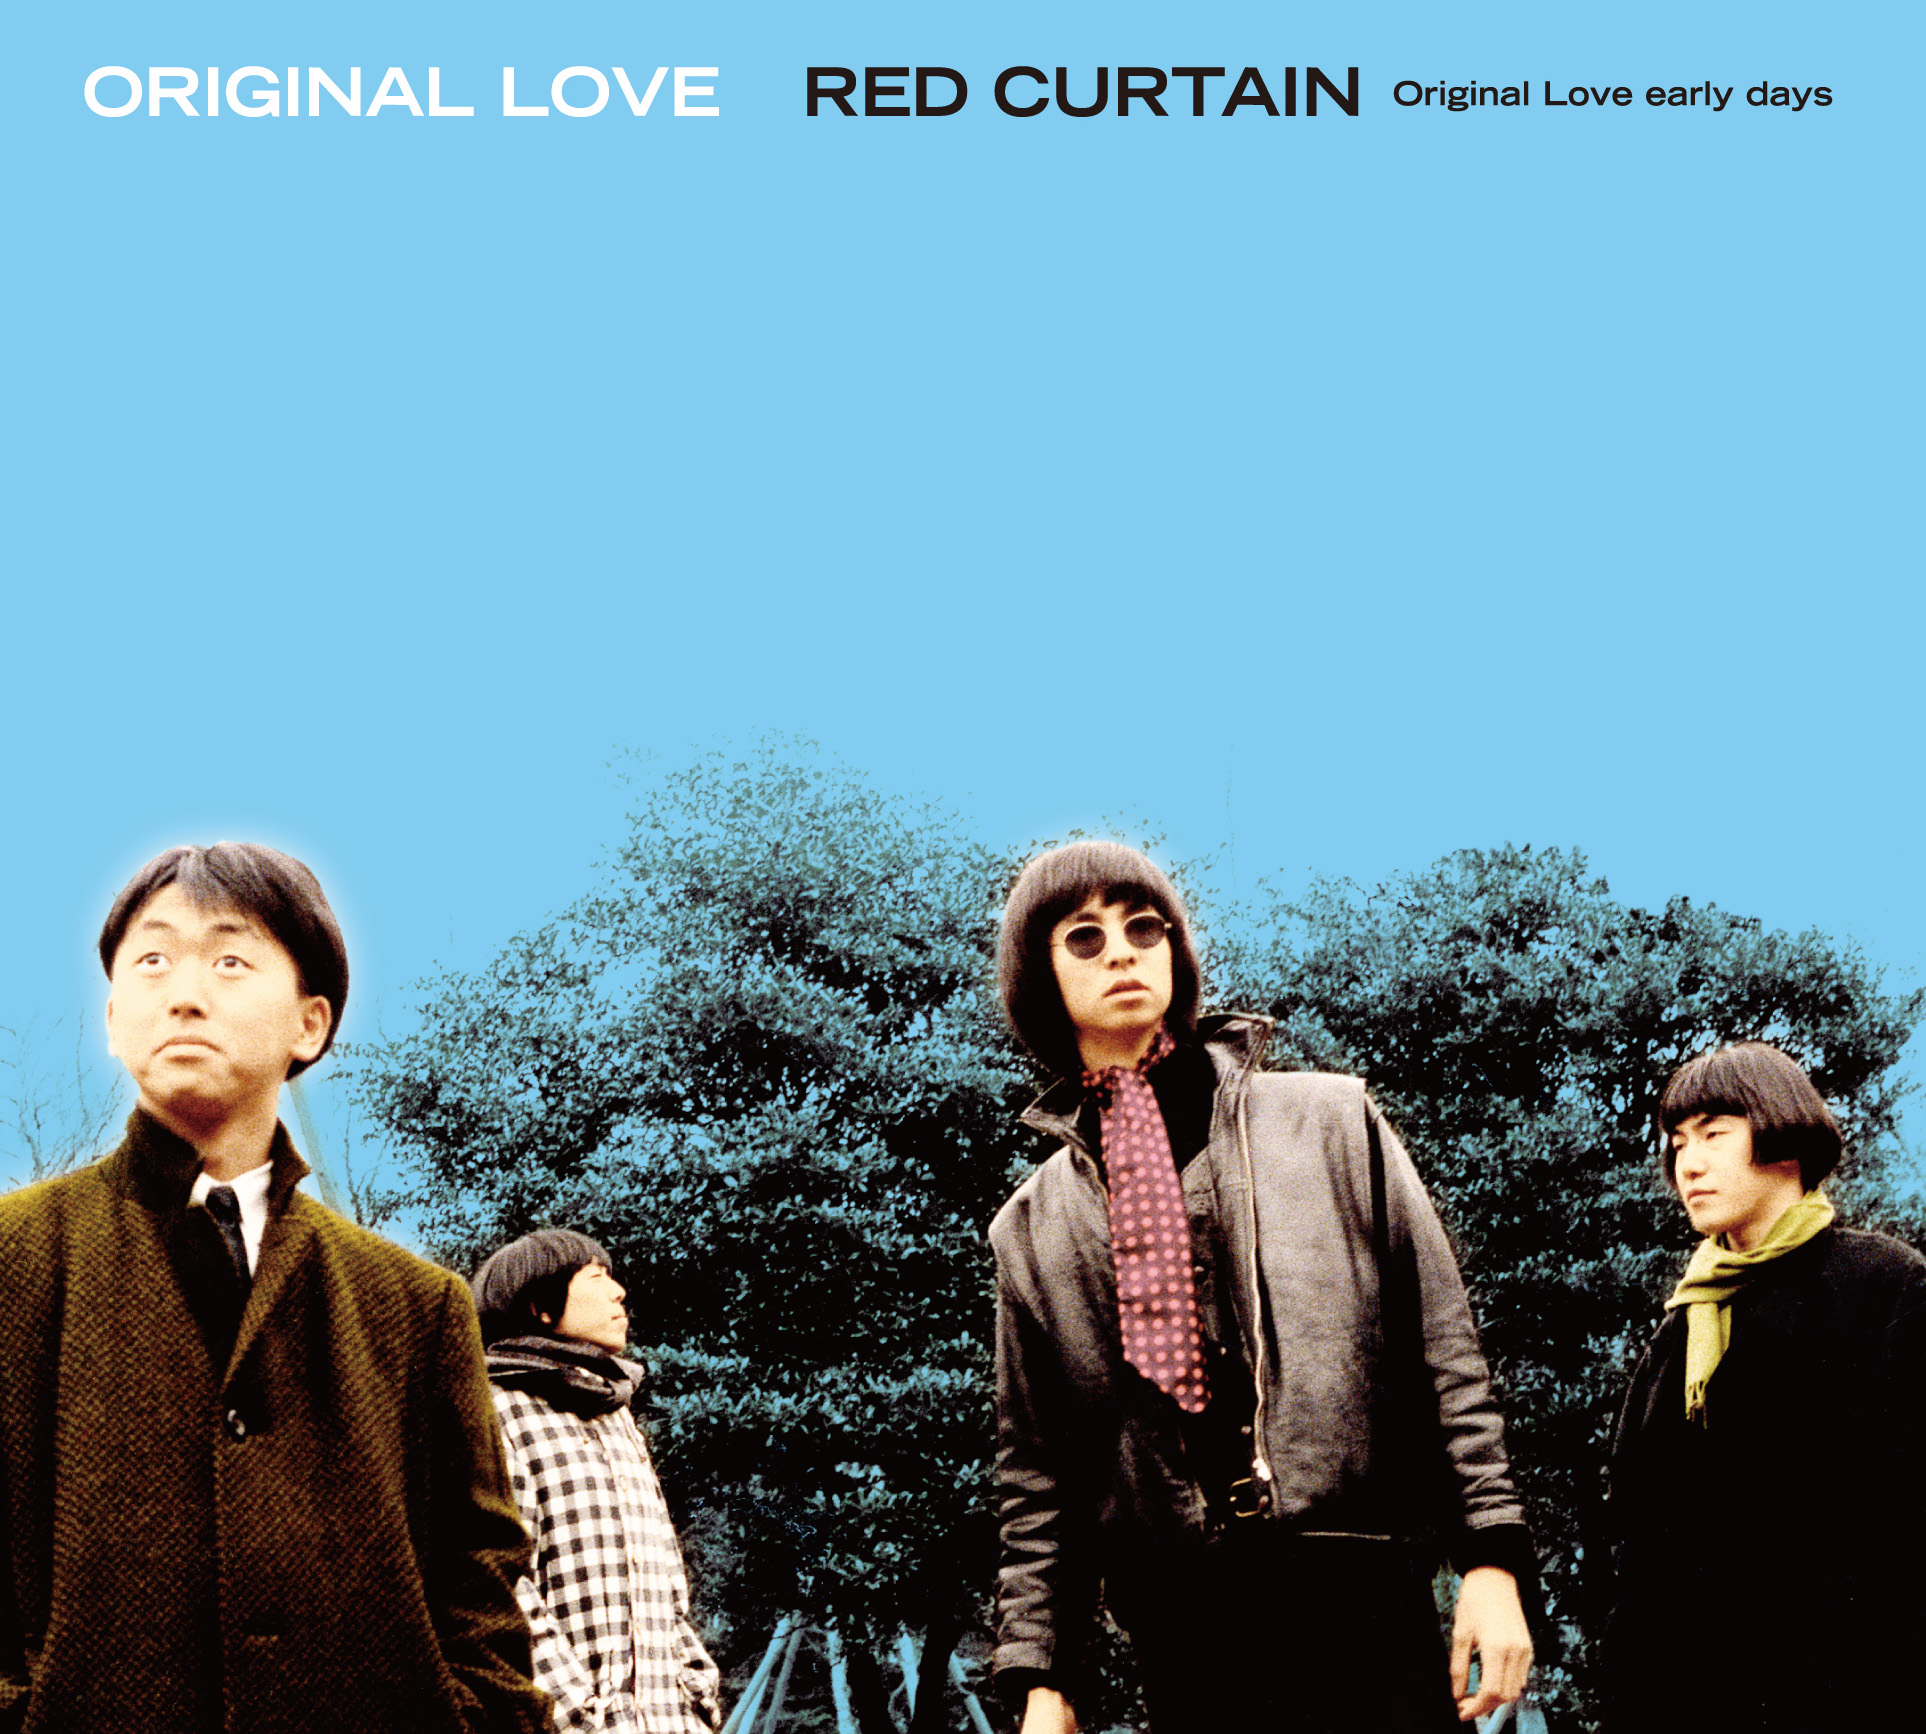 RED CURTAIN Original Love early days / DISCOGRAPHY / Original Love 